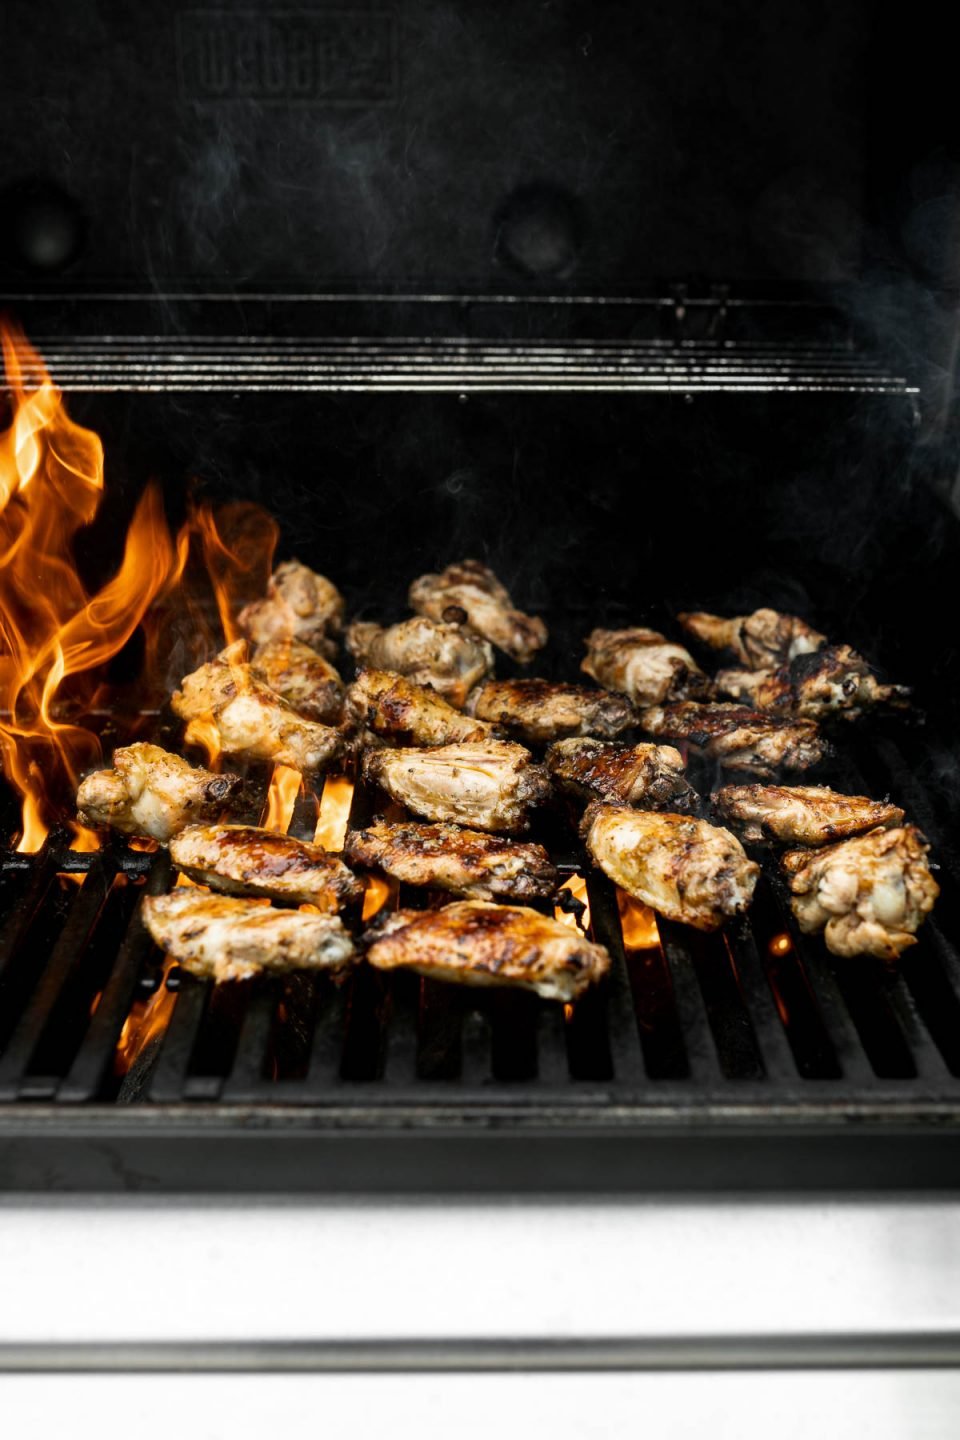 Grilled Greek Chicken Wings being char-grilled on a Weber Grill over direct heat. Flames from the grill burners are present as the chicken wings finish on the grill.